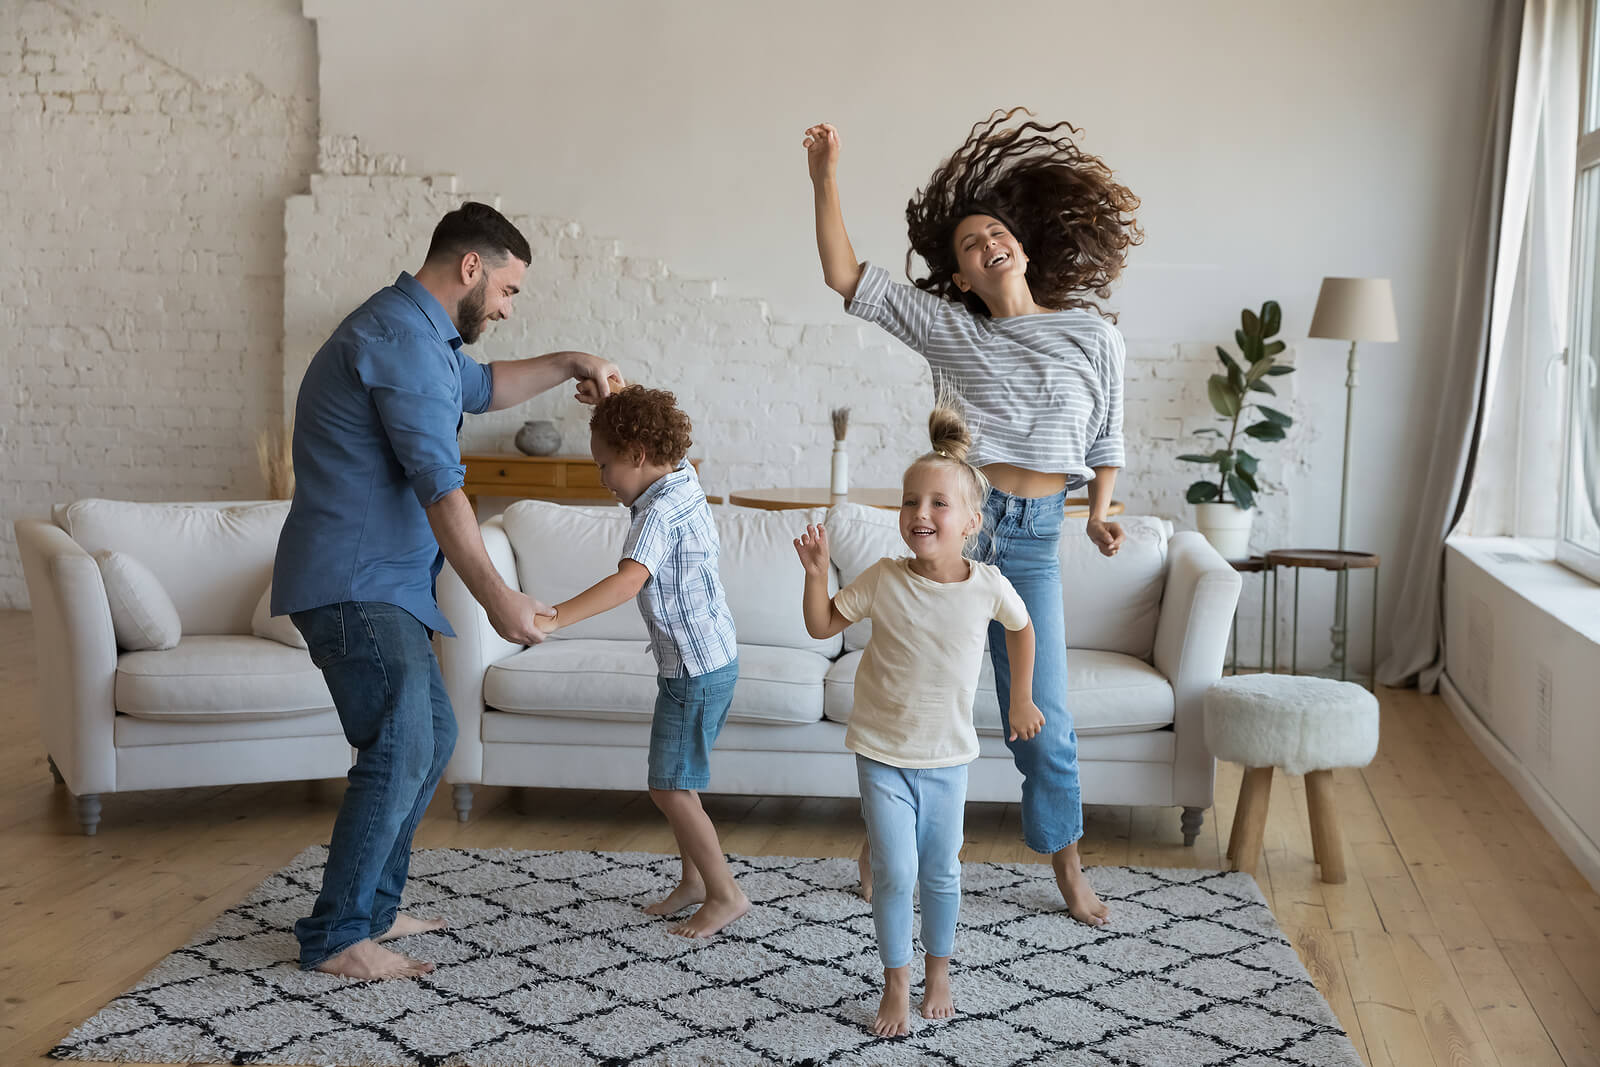 Shows a family dancing in the living room. Represents how a couples therapist In Florida can help you find ways to have fun in your relationship.